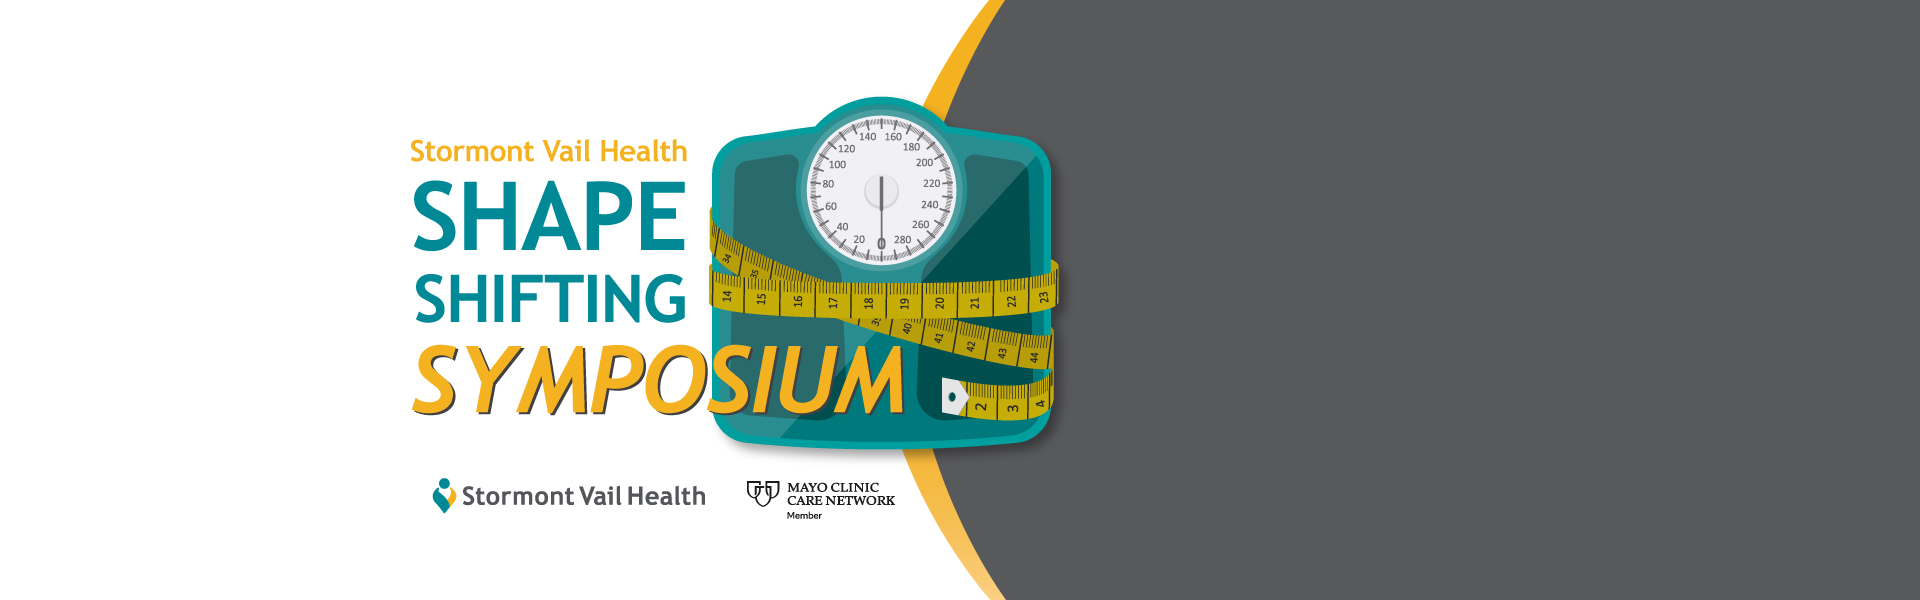 a graphic of a scale with a tape measure around it with text about stormont vail health shape shifting symposium